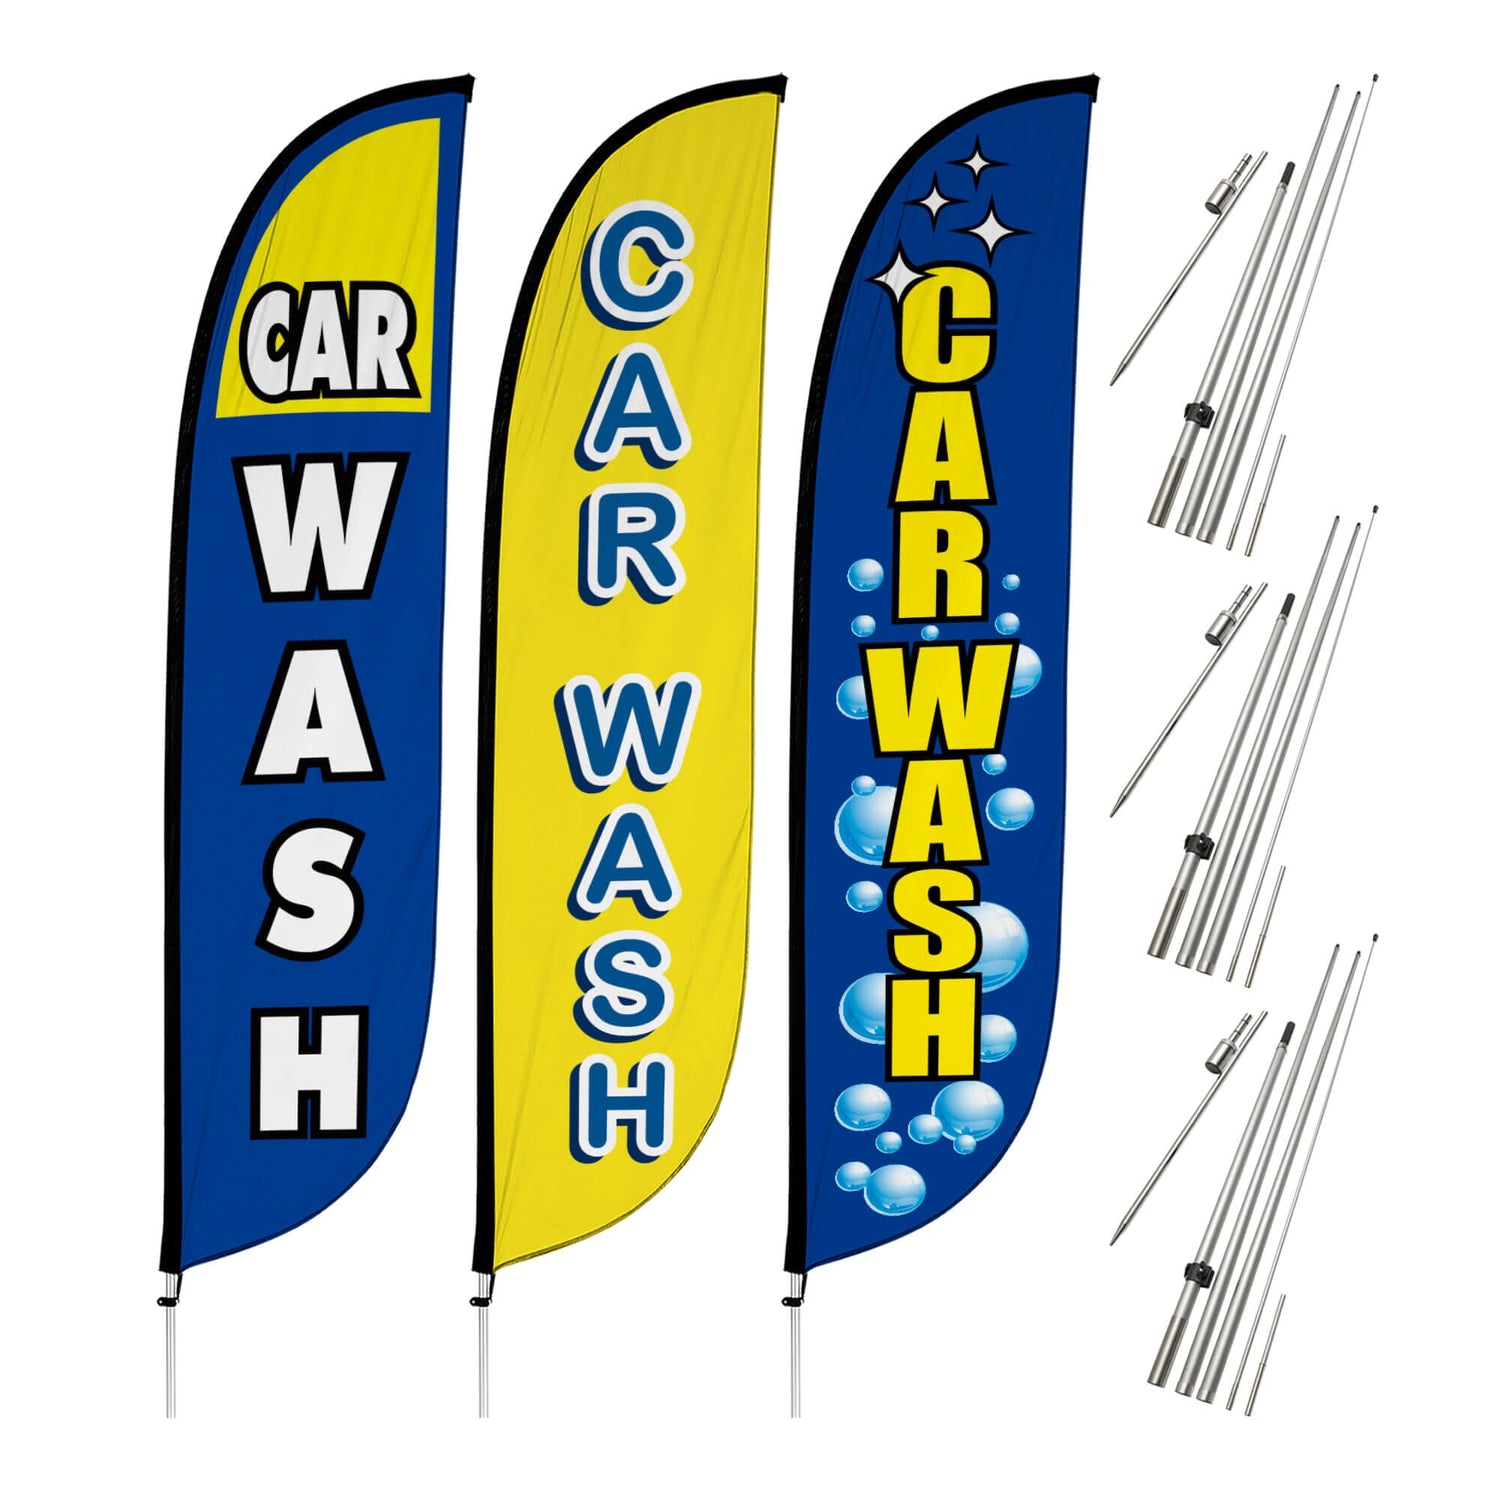 Car Wash Feather Flag - Variety 3 Pack w/ Ground Spike Pole Set 10M1200438x3GSet